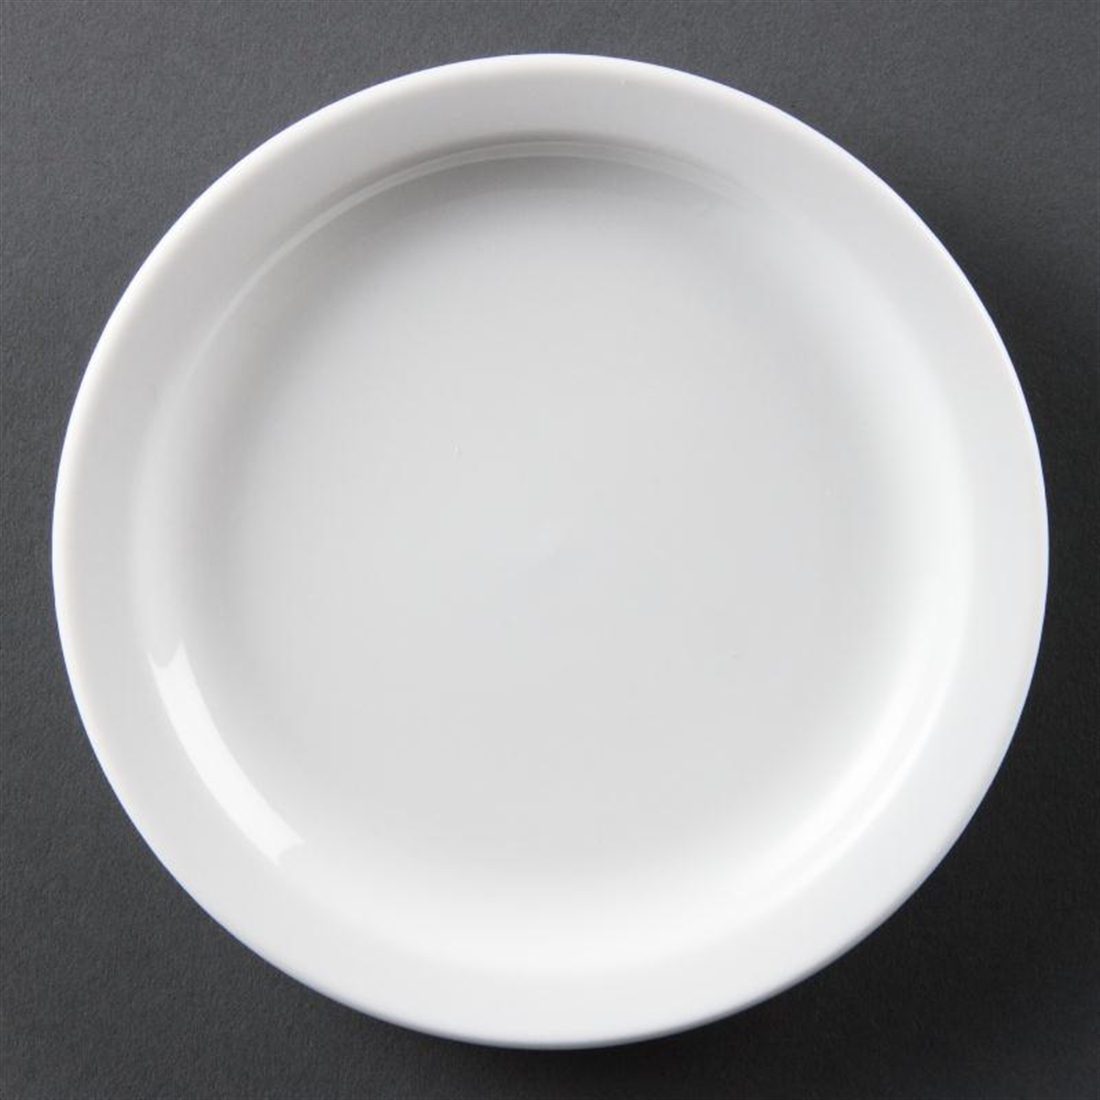 Olympia Whiteware Narrow Rimmed Plates 150mm